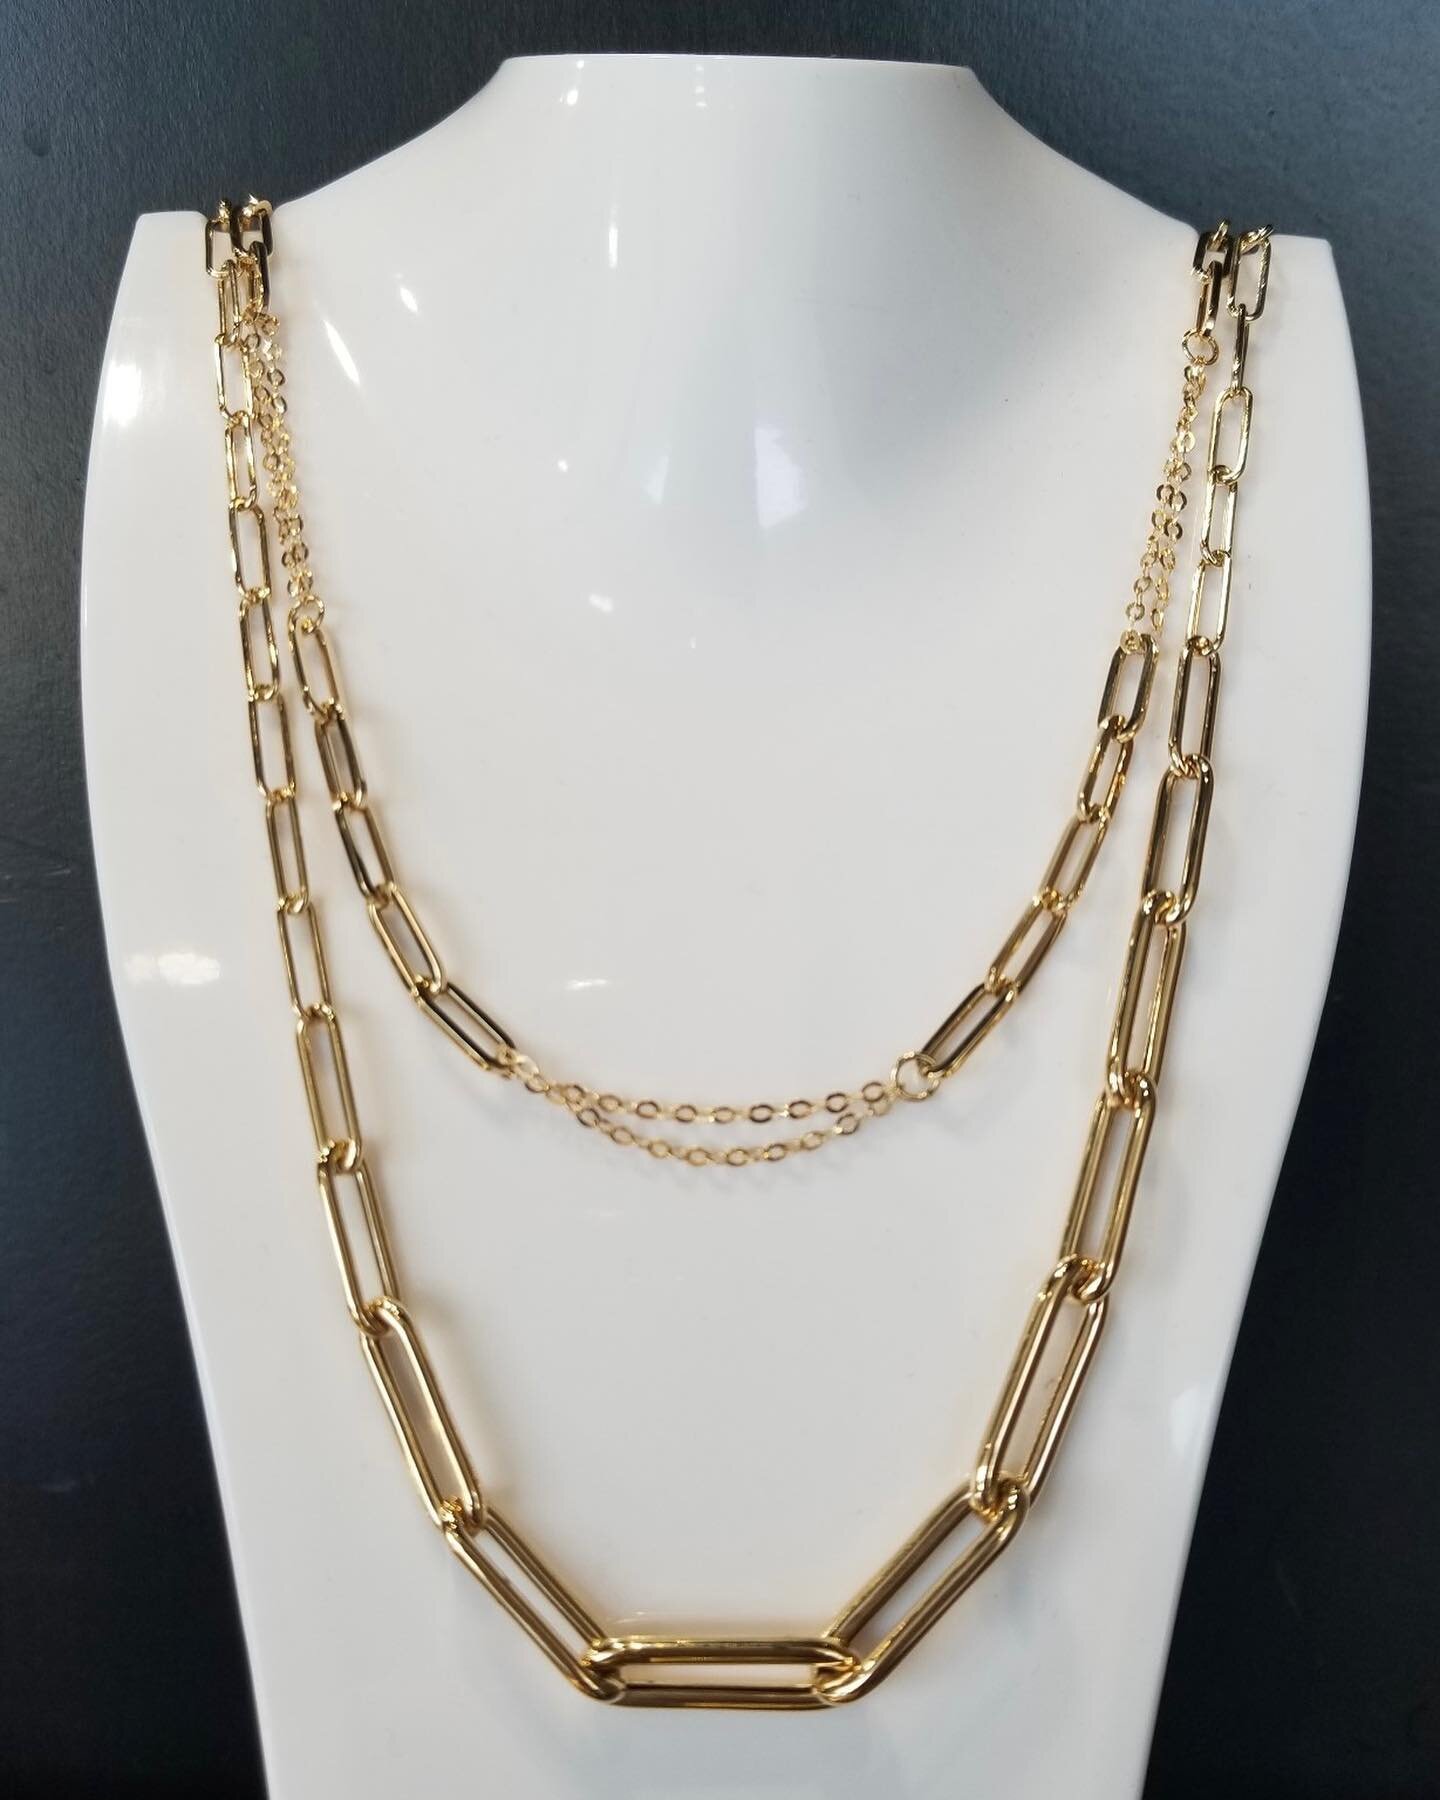 A few twists on a modern favorite, new paper clip chain styles!🖇
-
-
-
#paperclipchain #layerednecklaces #yellowgold #trendingnecklaces #moorparkjeweler